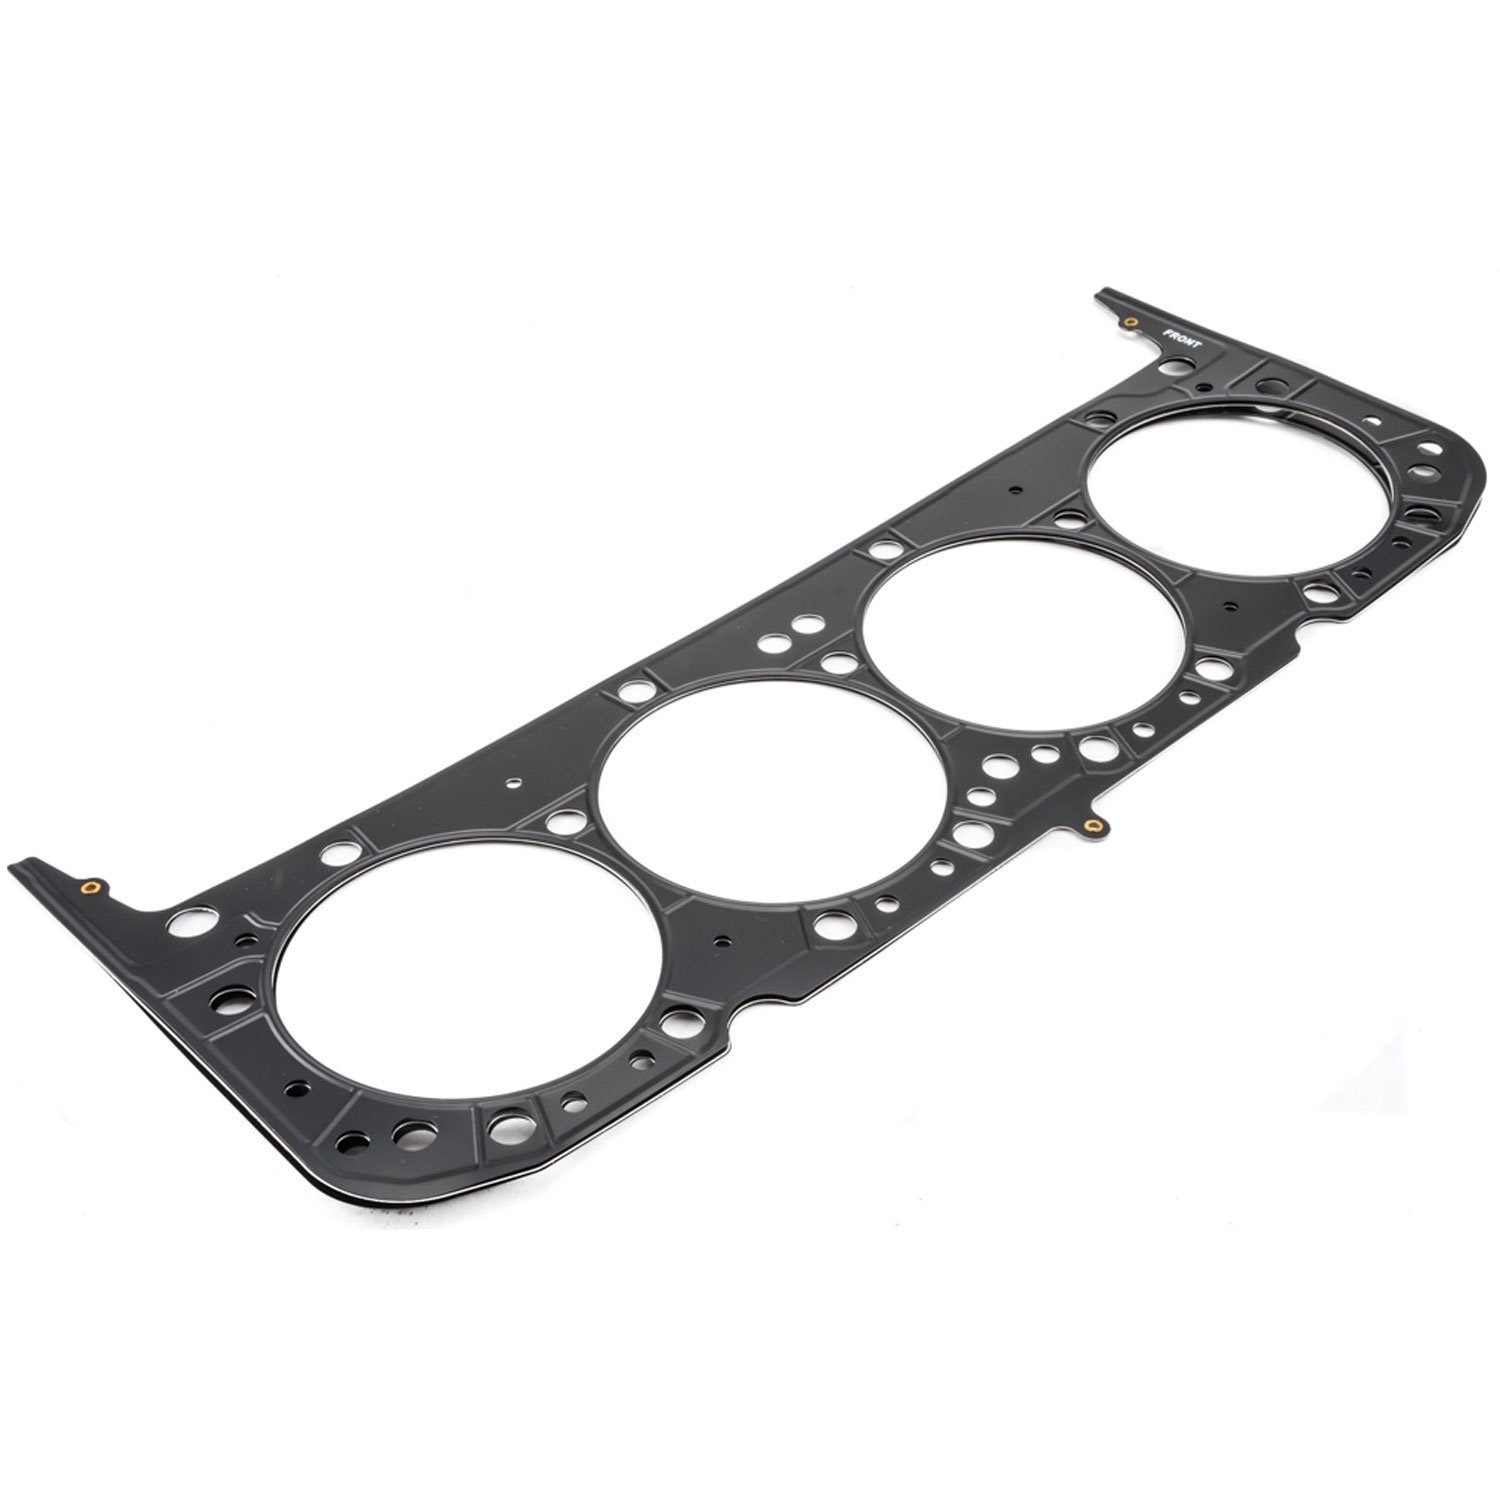 MLS Cylinder Head Gasket for Small Block Chevy